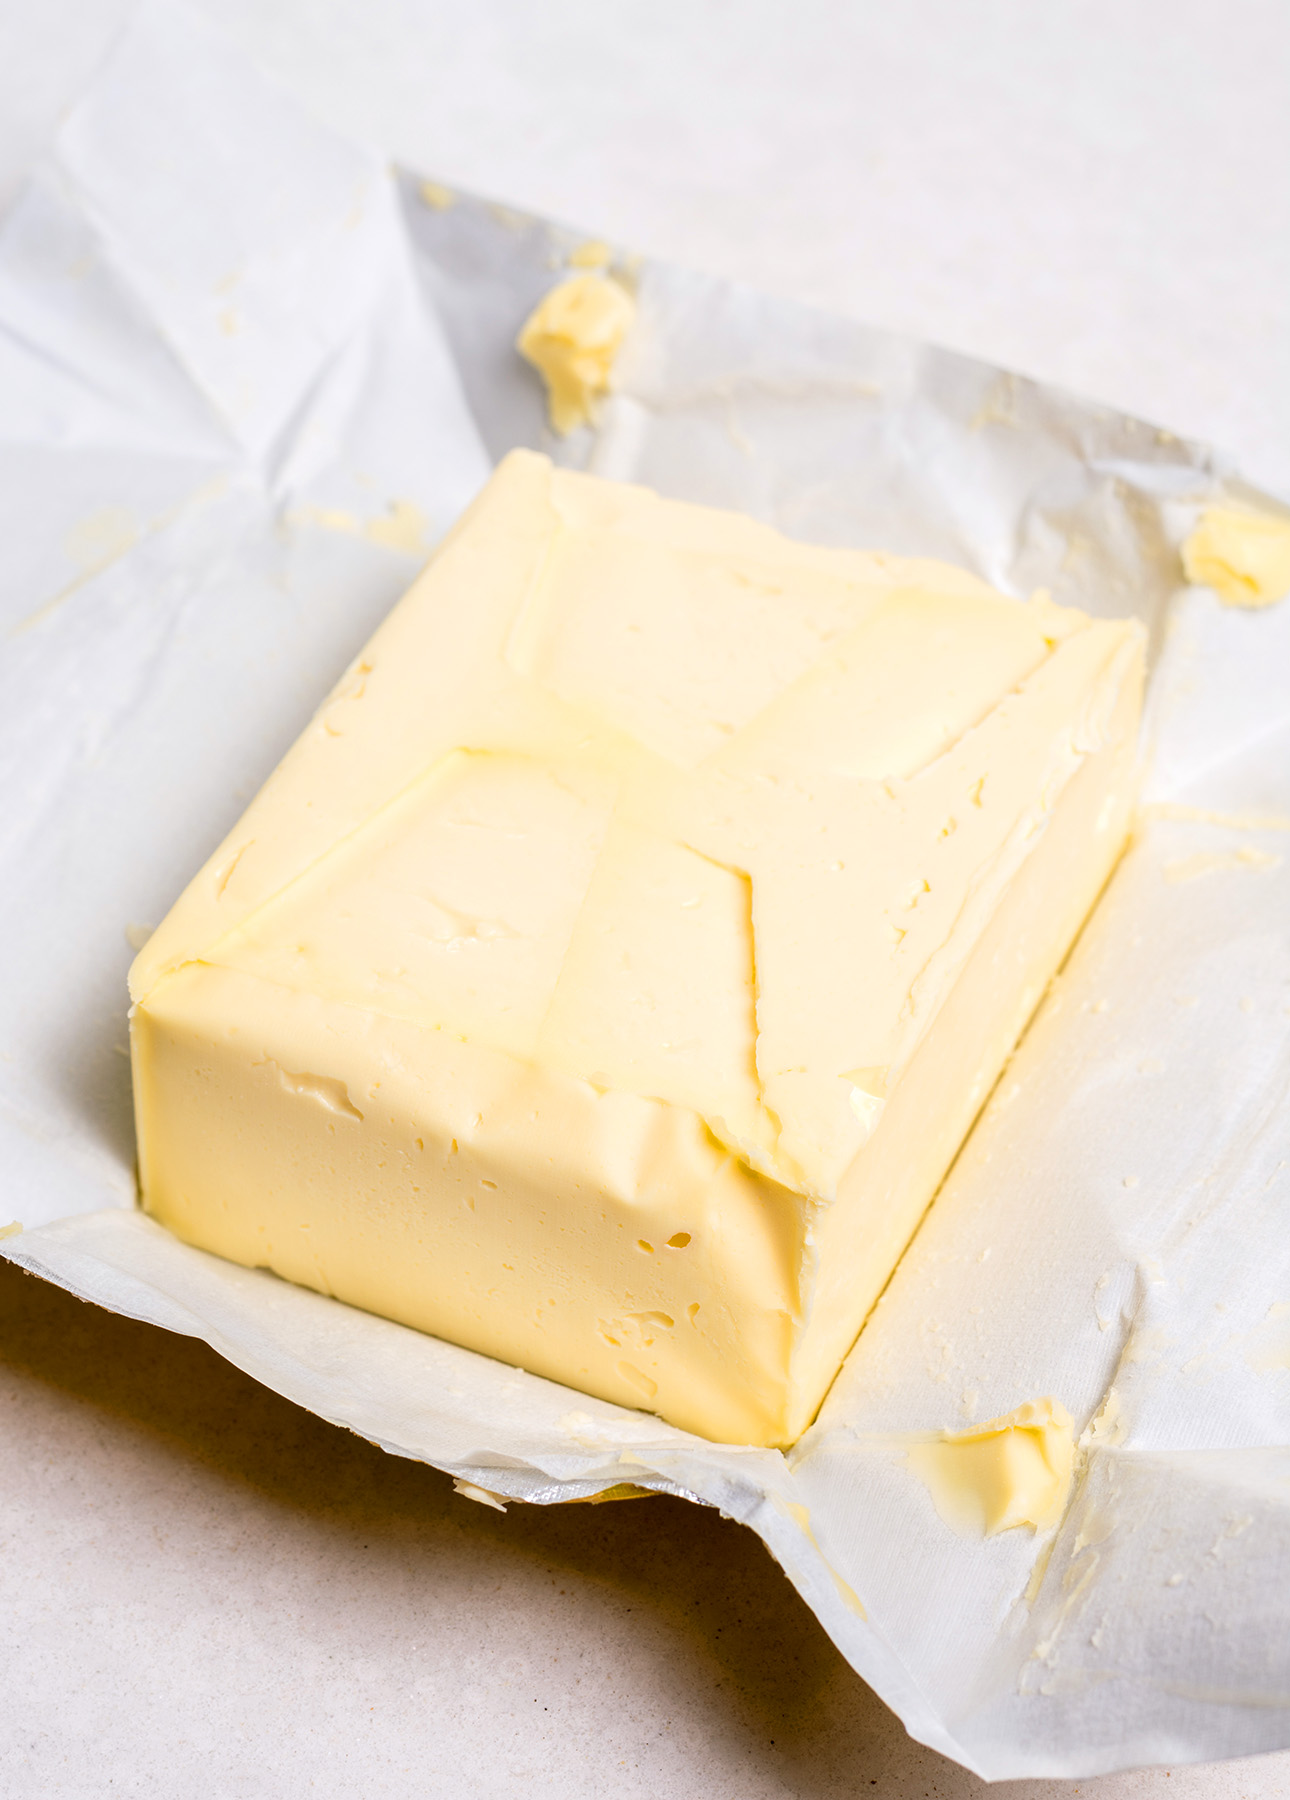 High quality European butter is best for making brown butter // FoodNouveau.com